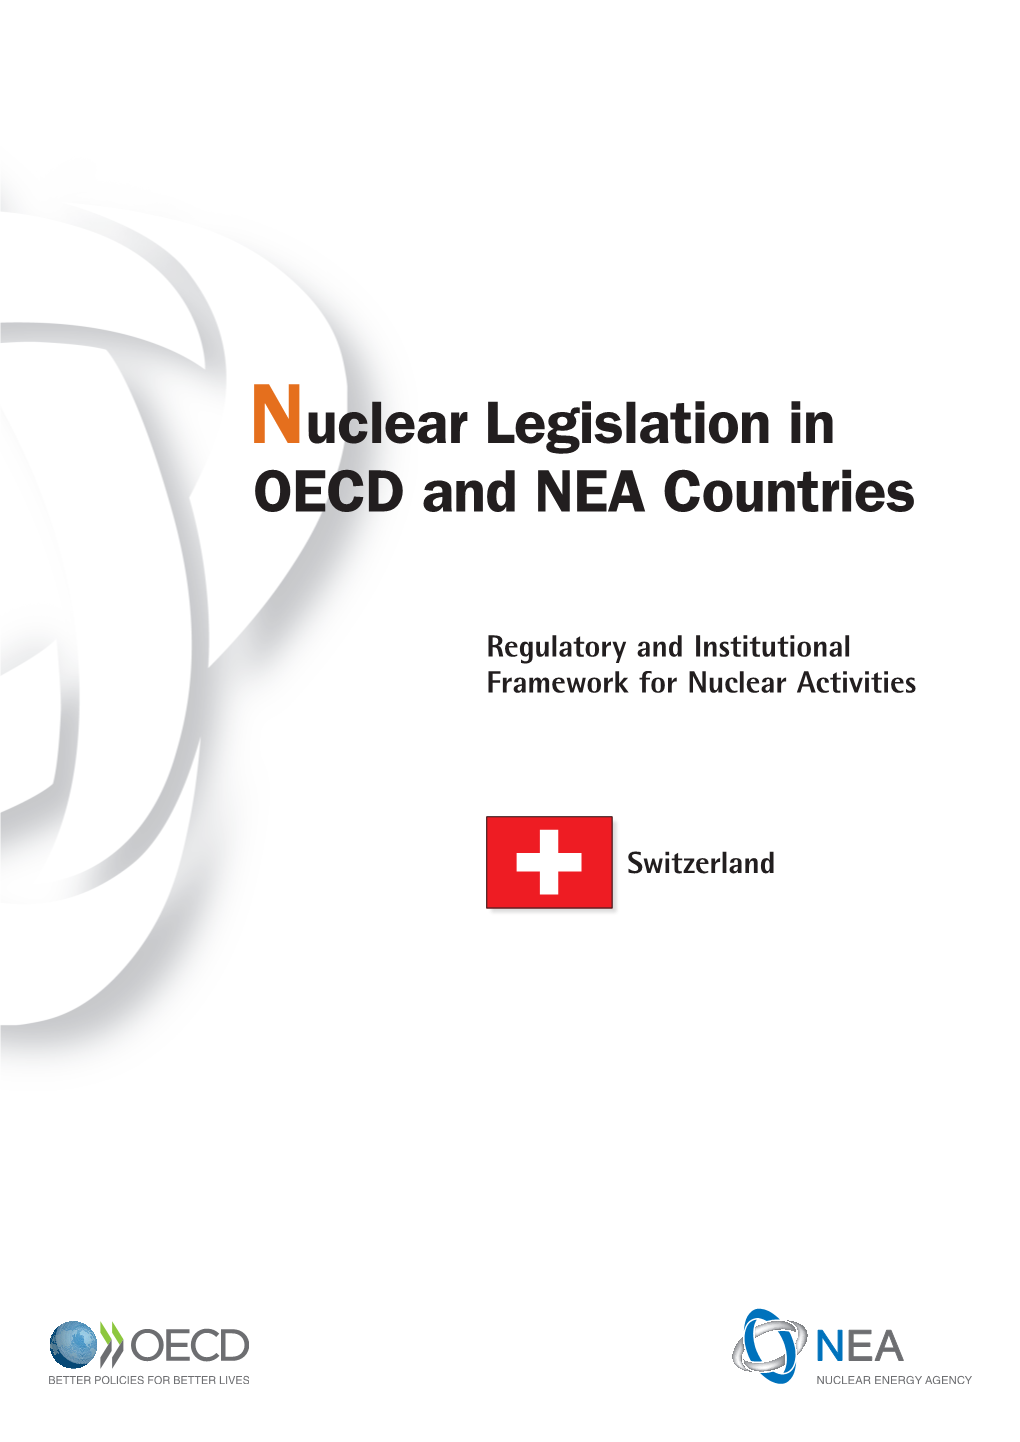 Nuclear Legislation in OECD and NEA Countries